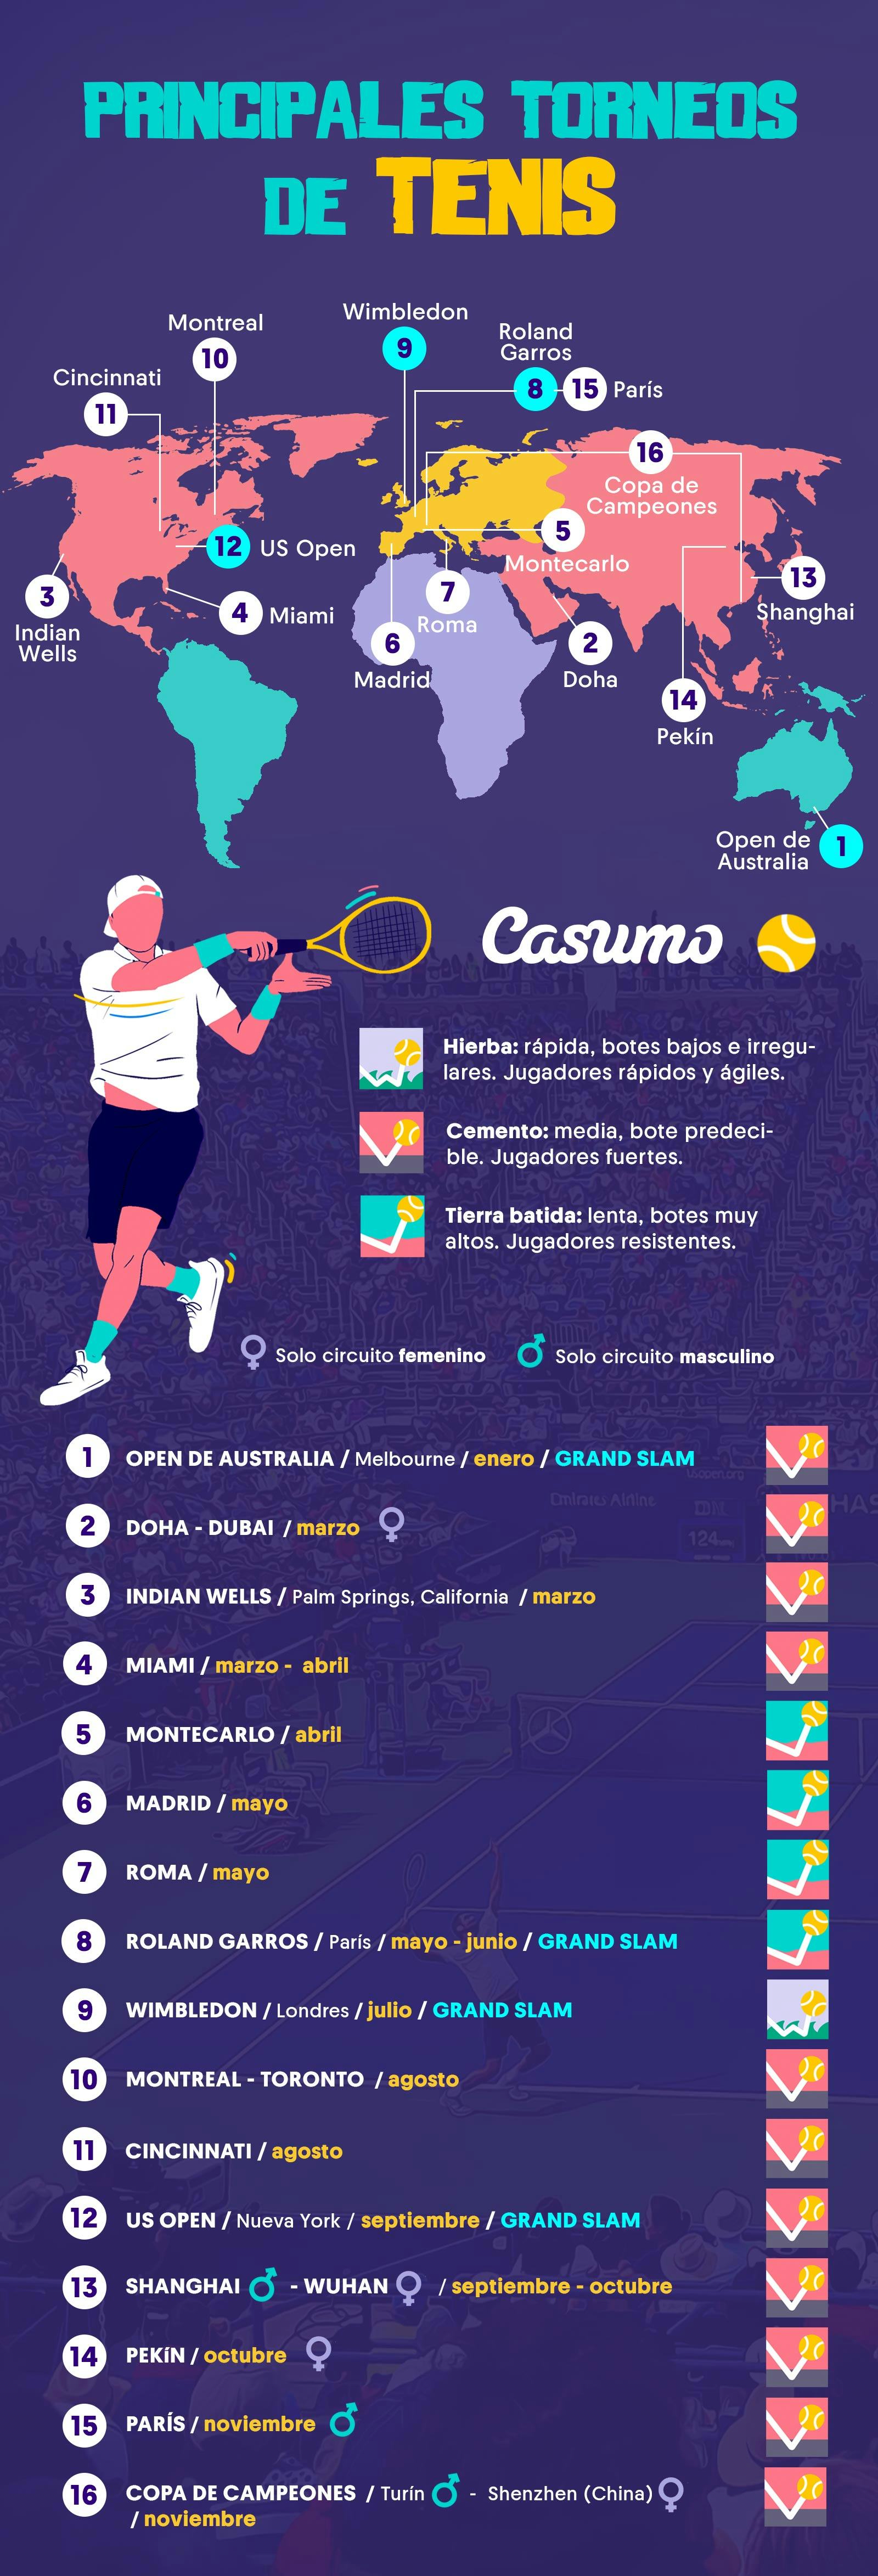 Tennis betting page Infographic Spain